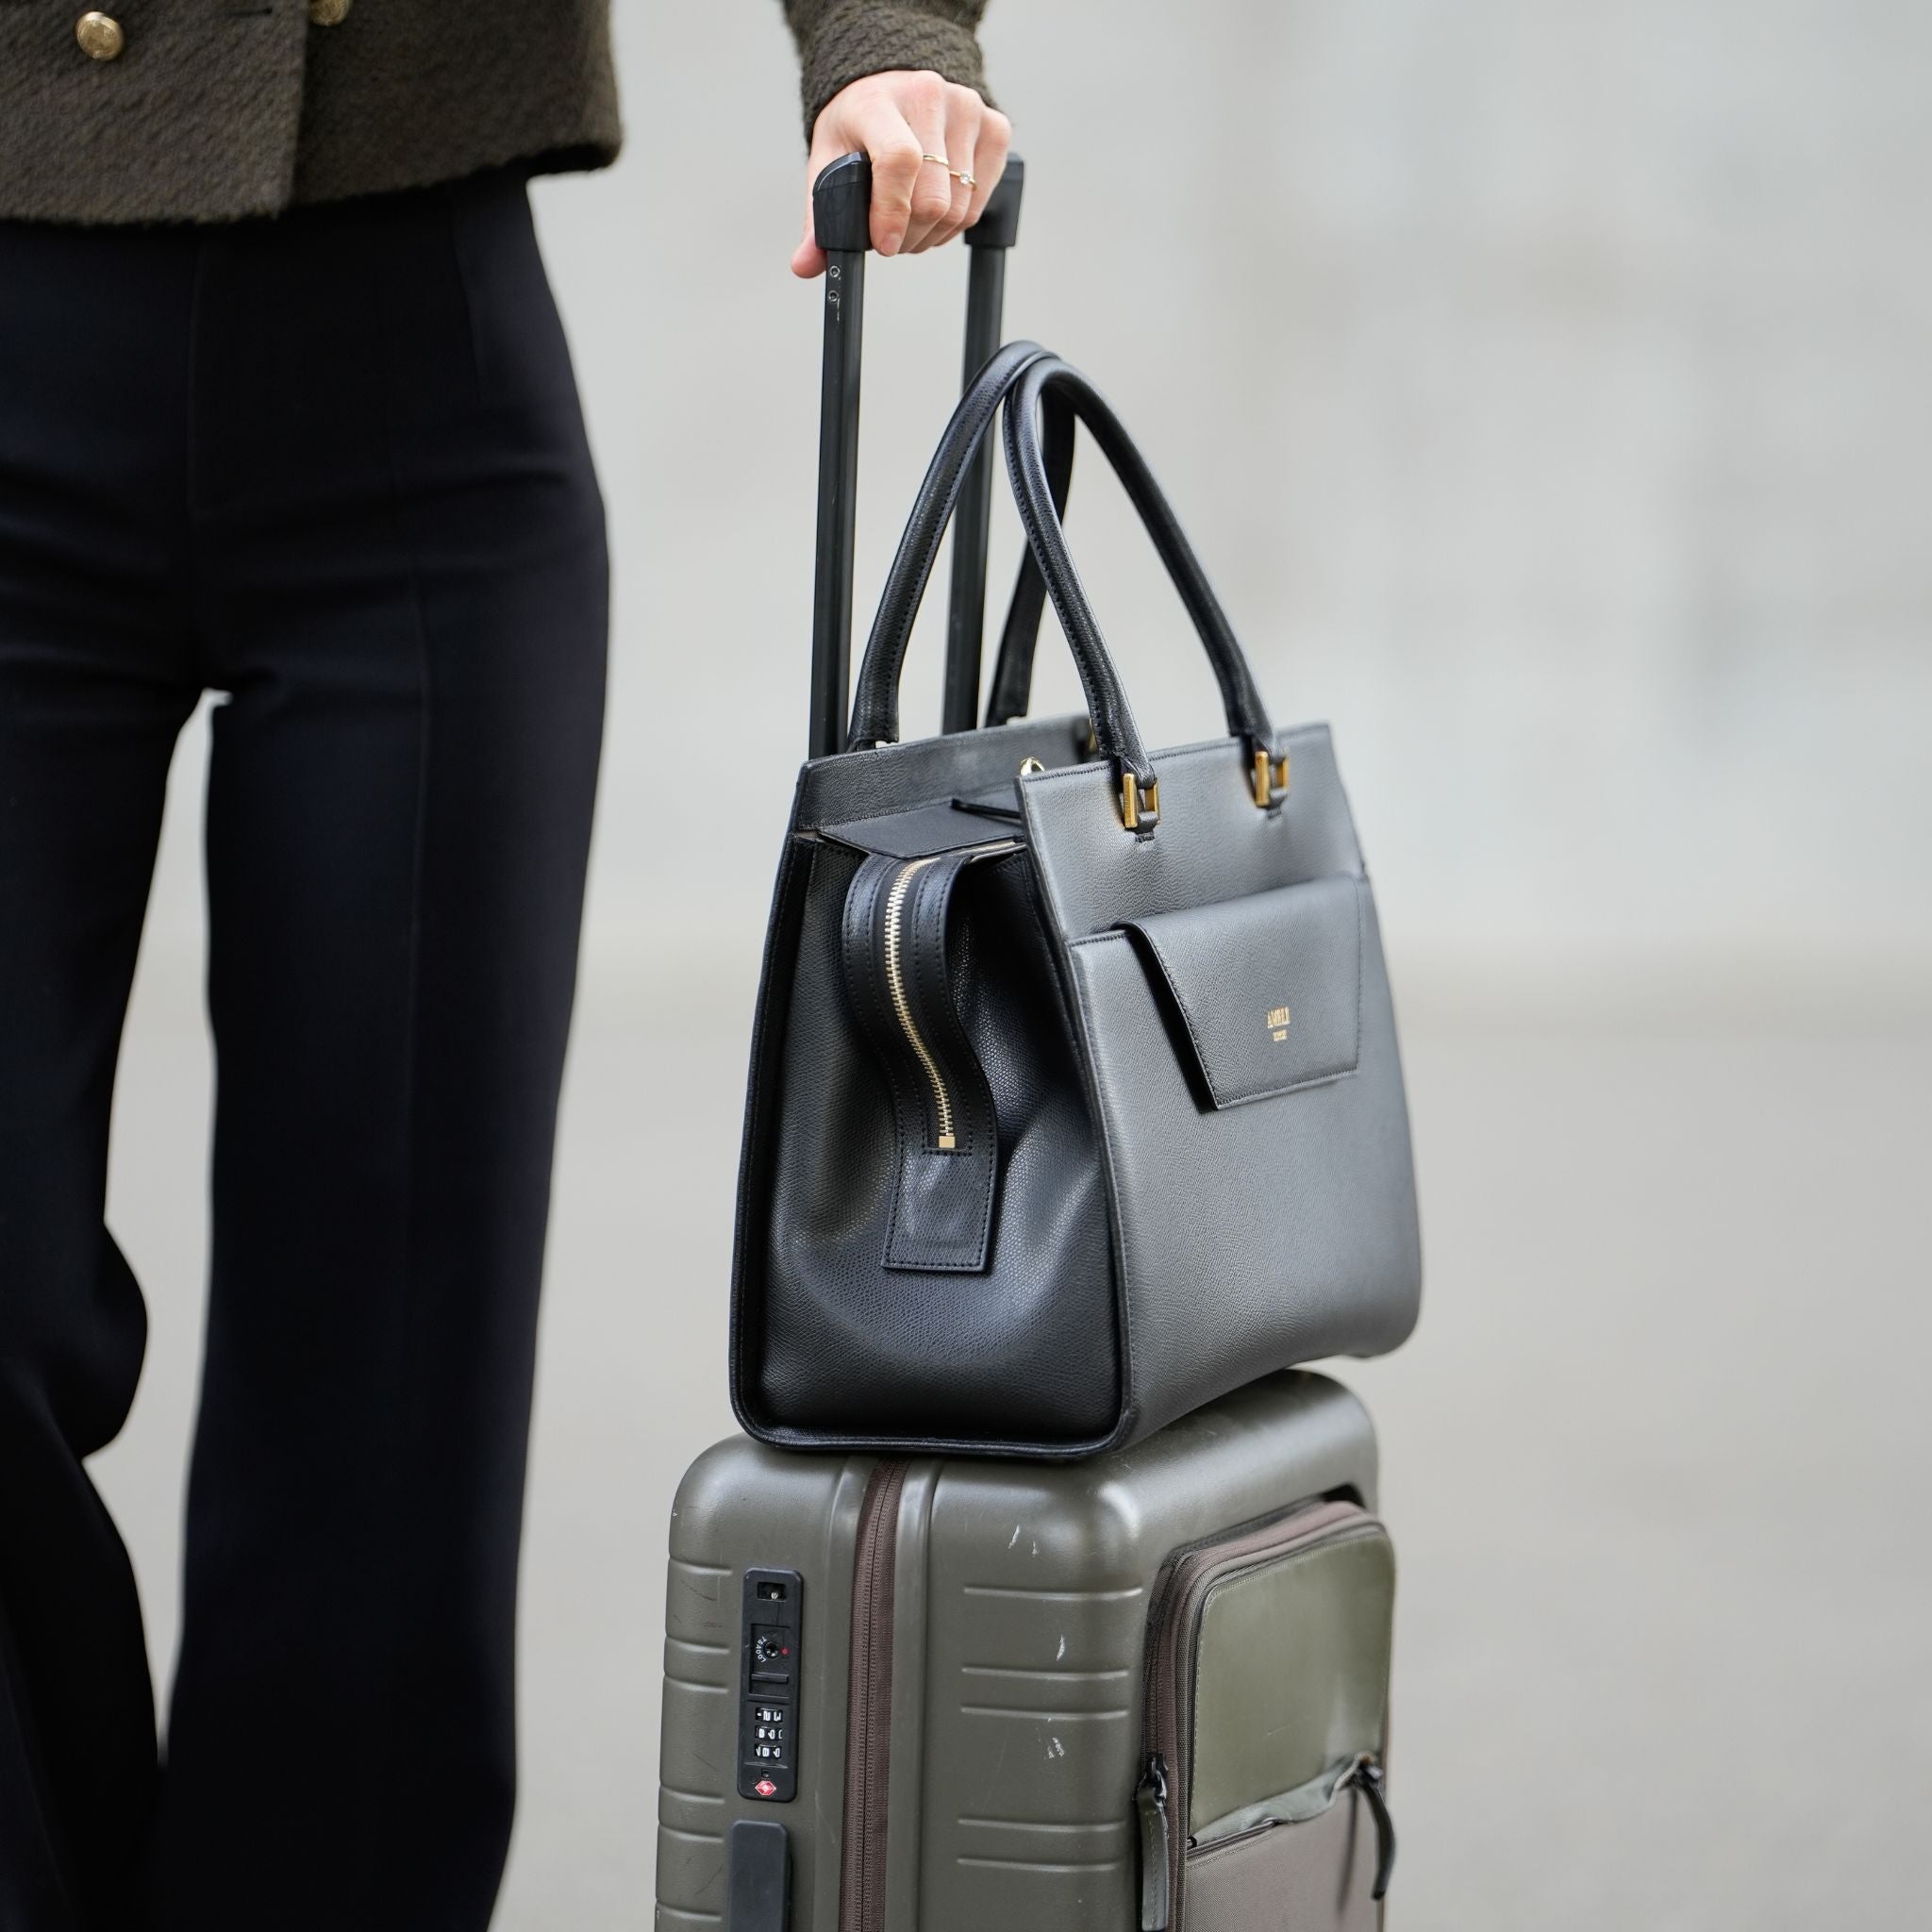 AMELI Zurich | CENTRAL | Greige | Pebbled Leather | On the suitcase